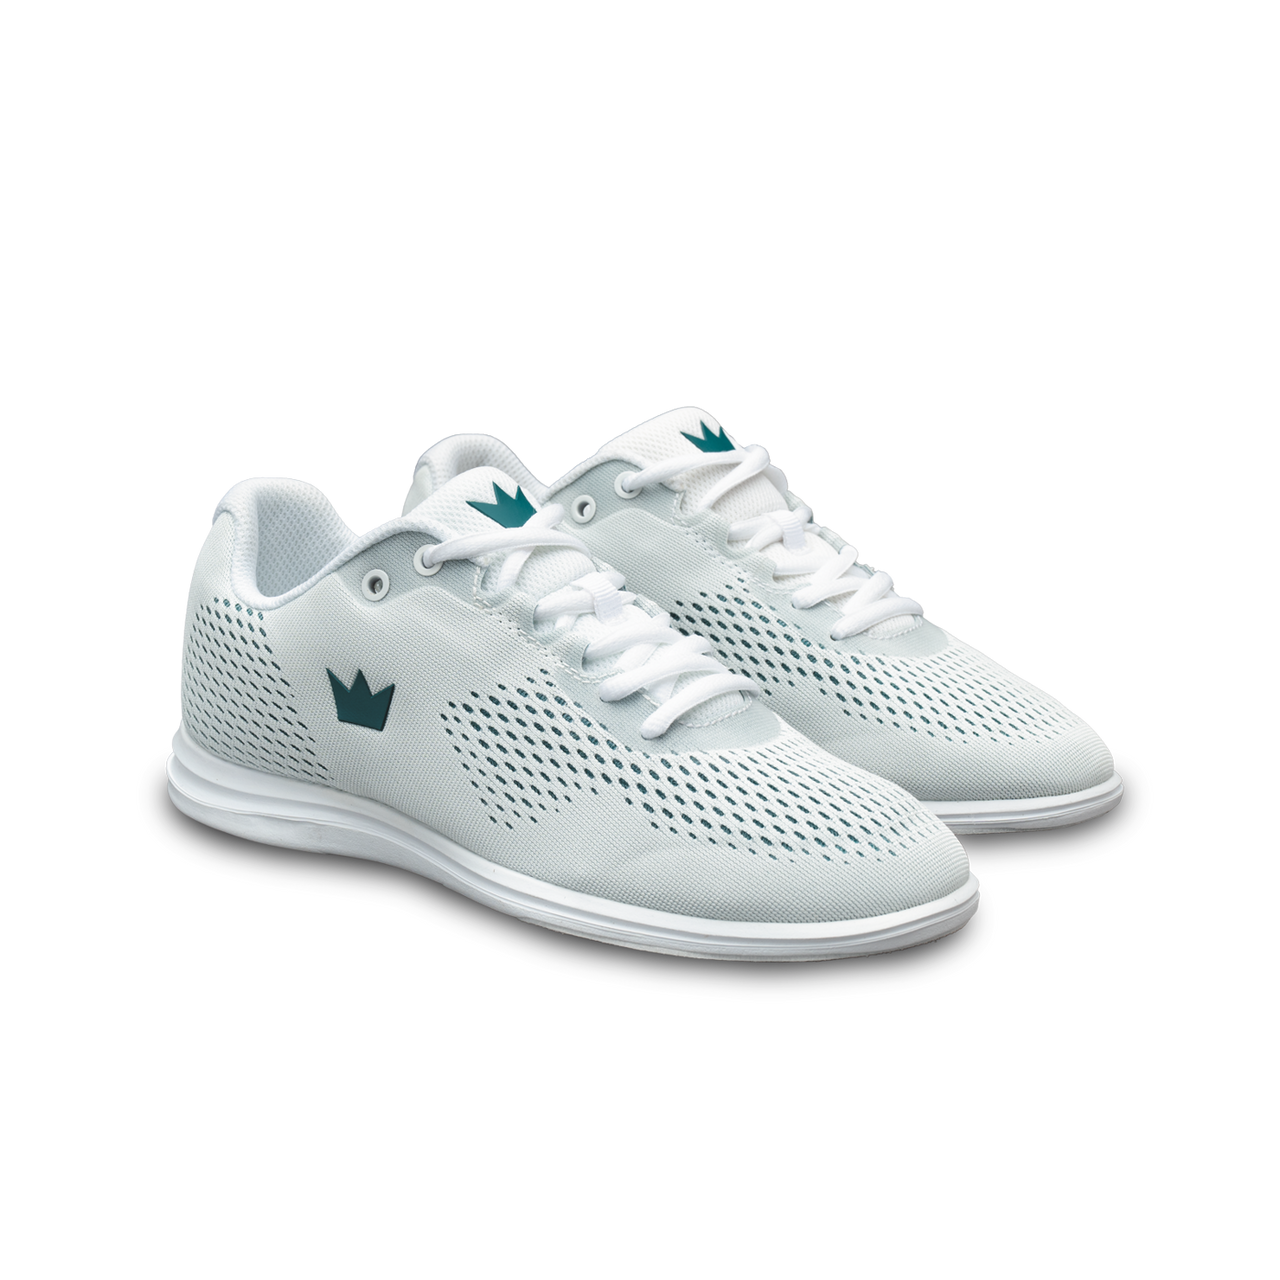 Brunswick Axis Womens Bowling Shoes White/Teal